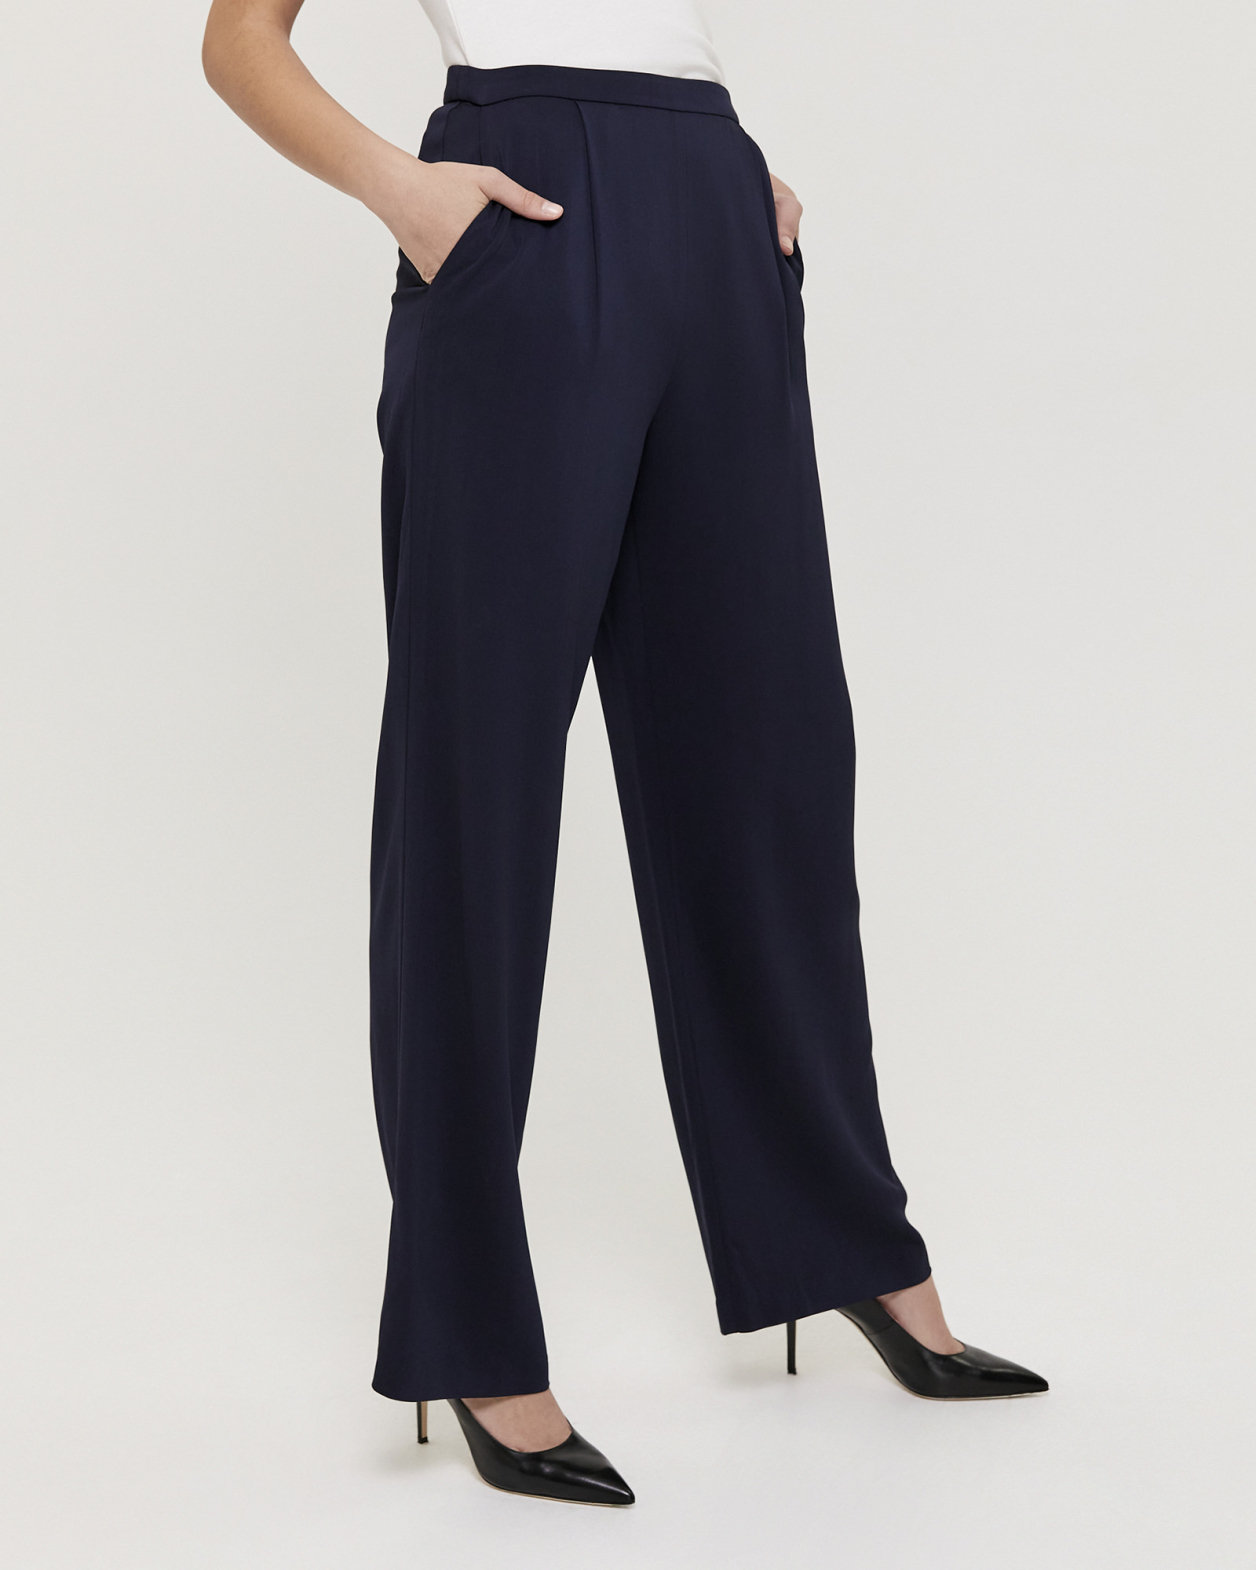 Isadora Wide Leg Pant in MIDNIGHT